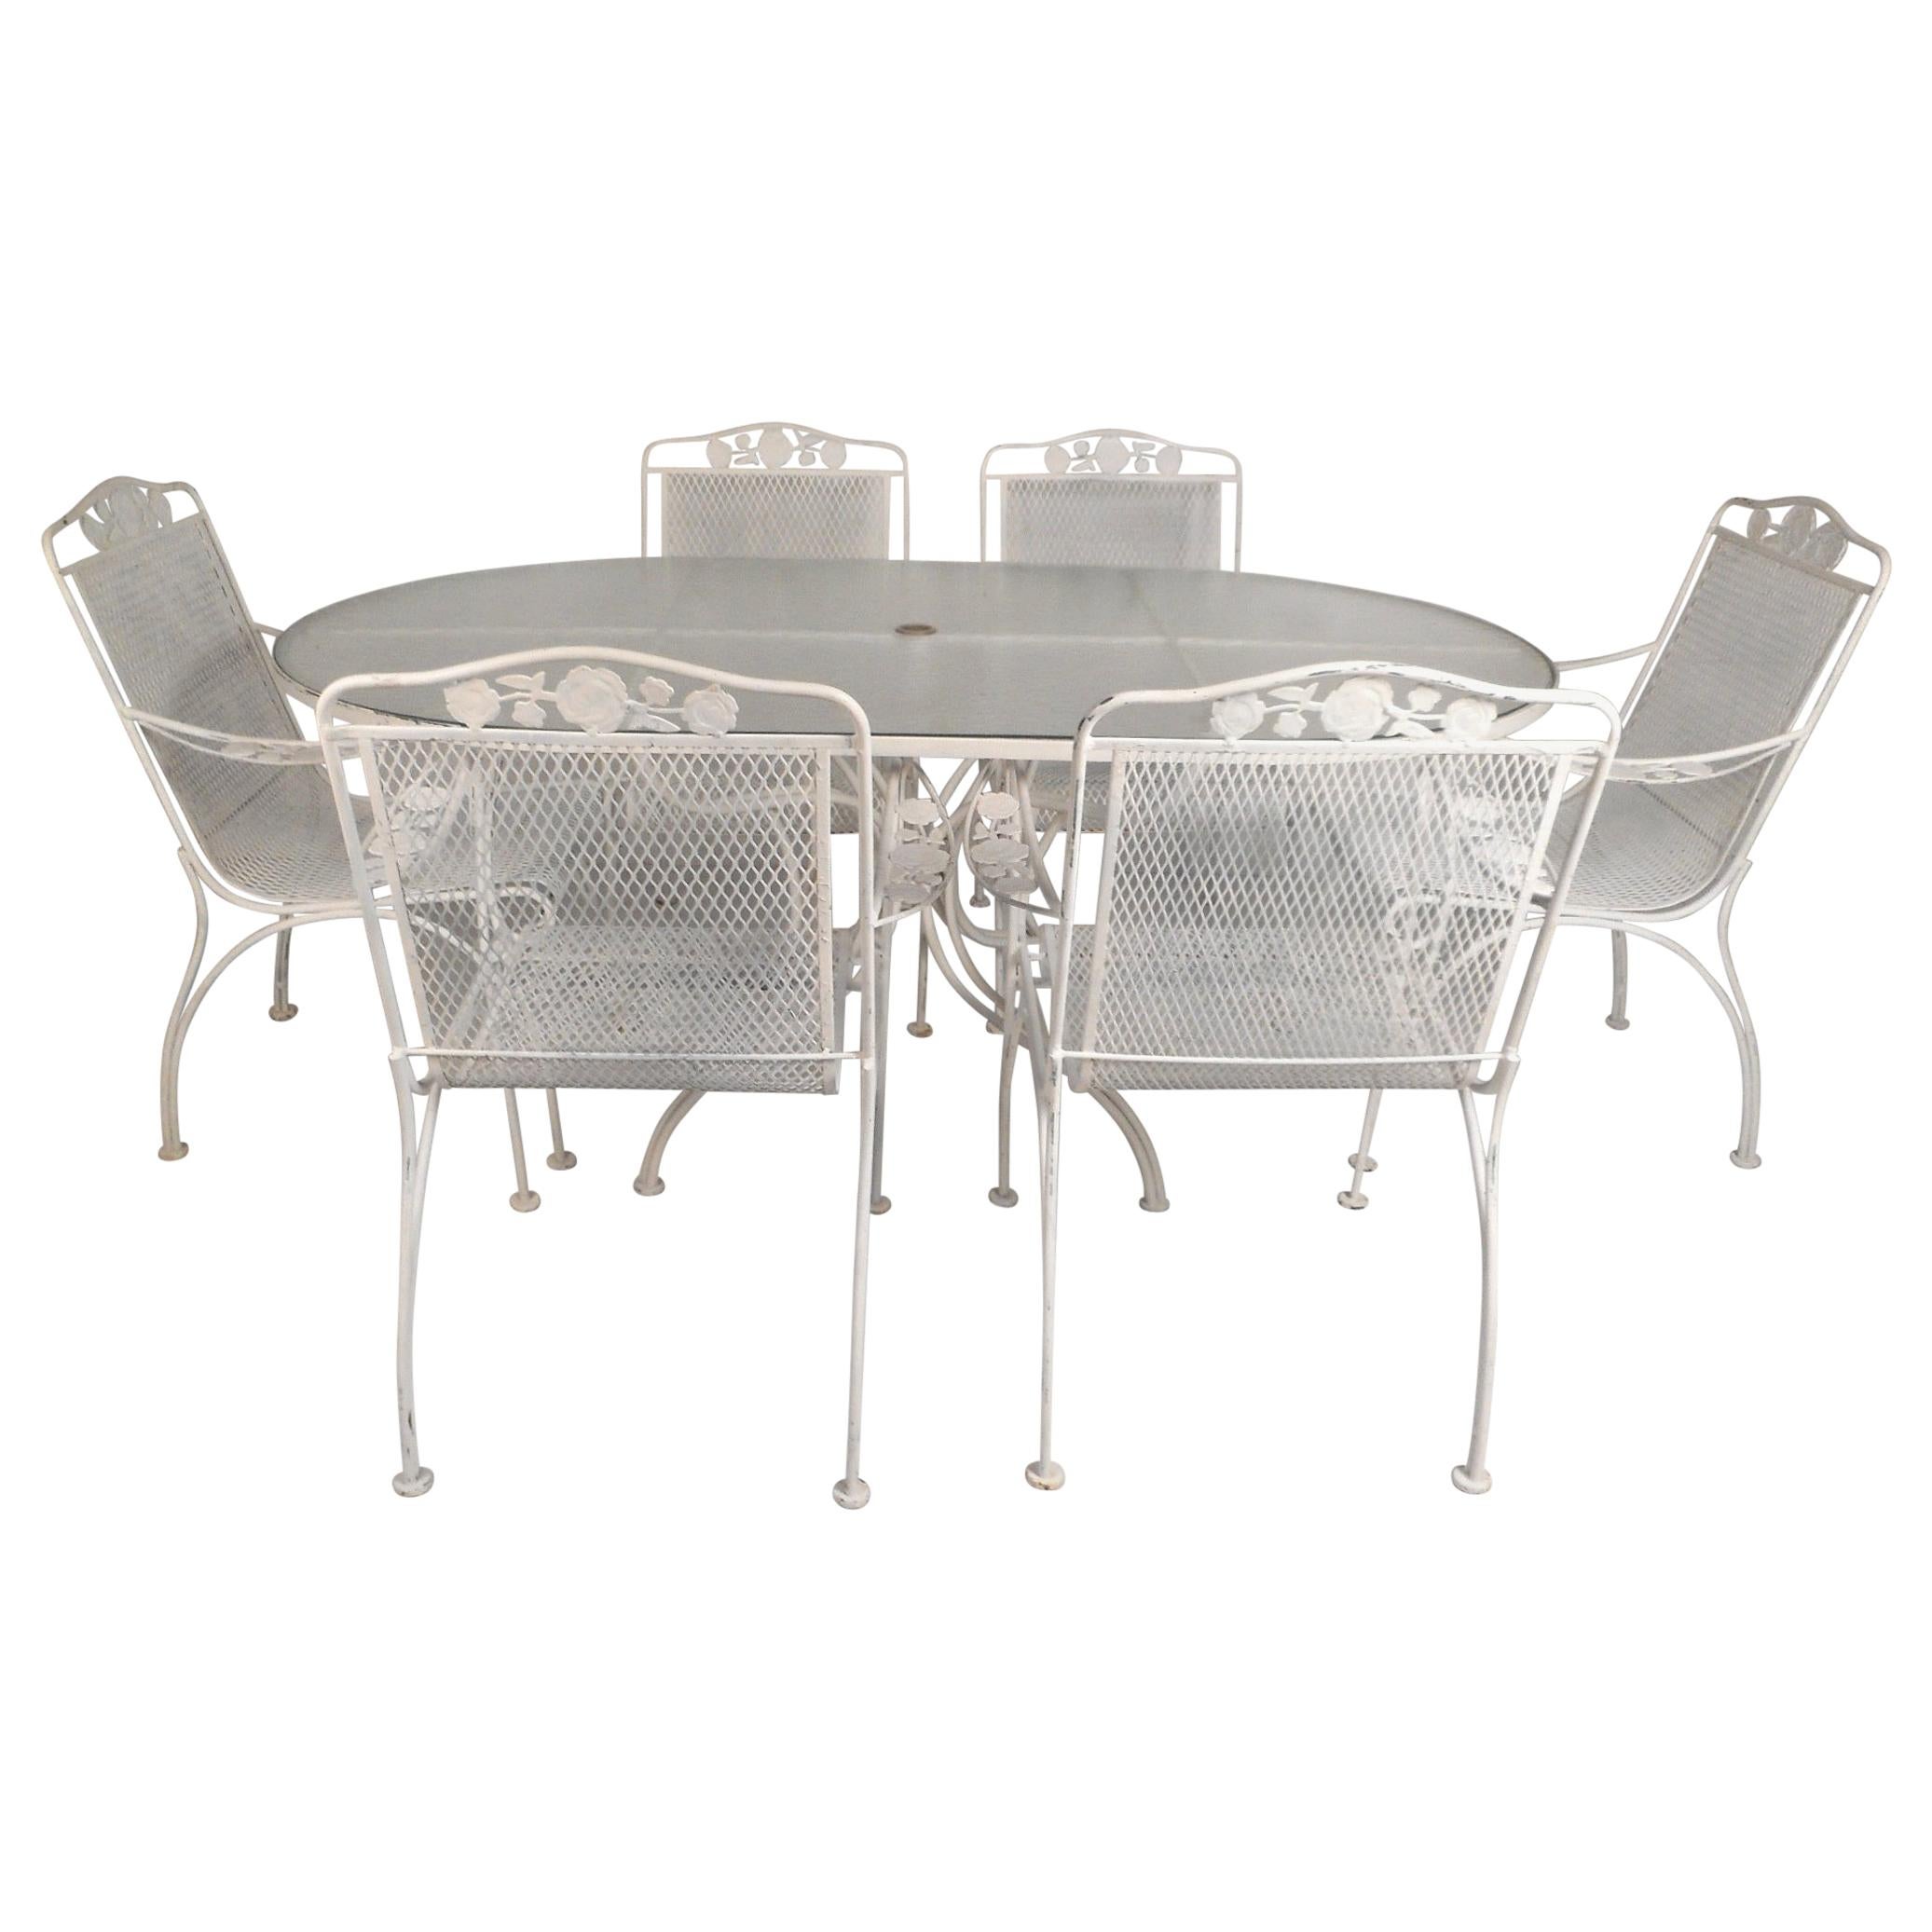 Mid-Century Modern Wrought Iron Patio Dining Table and Six Chairs